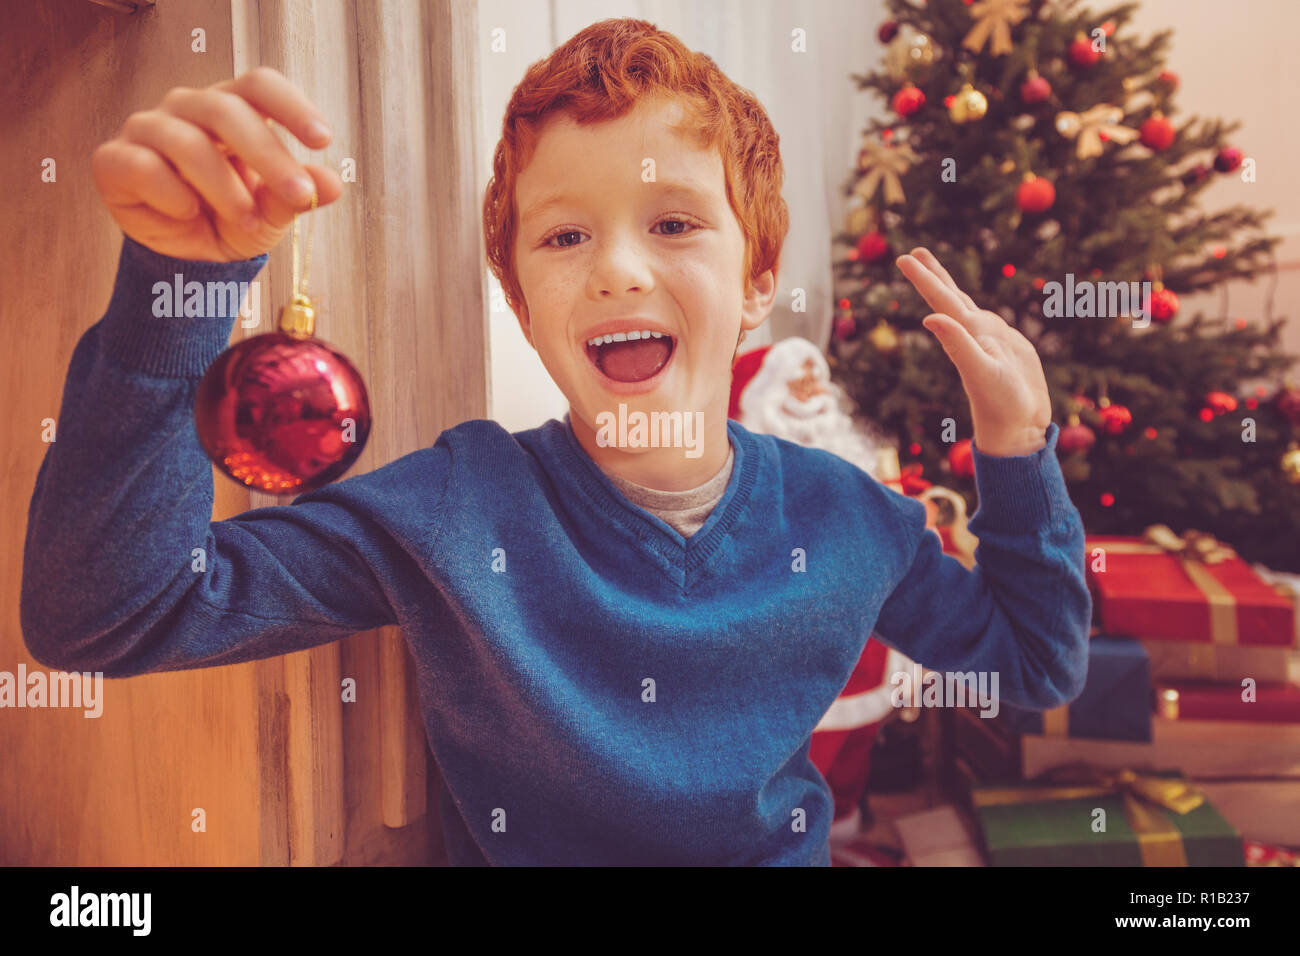 Cheerful ginger-haired boy showing new Christmas bauble Stock Photo